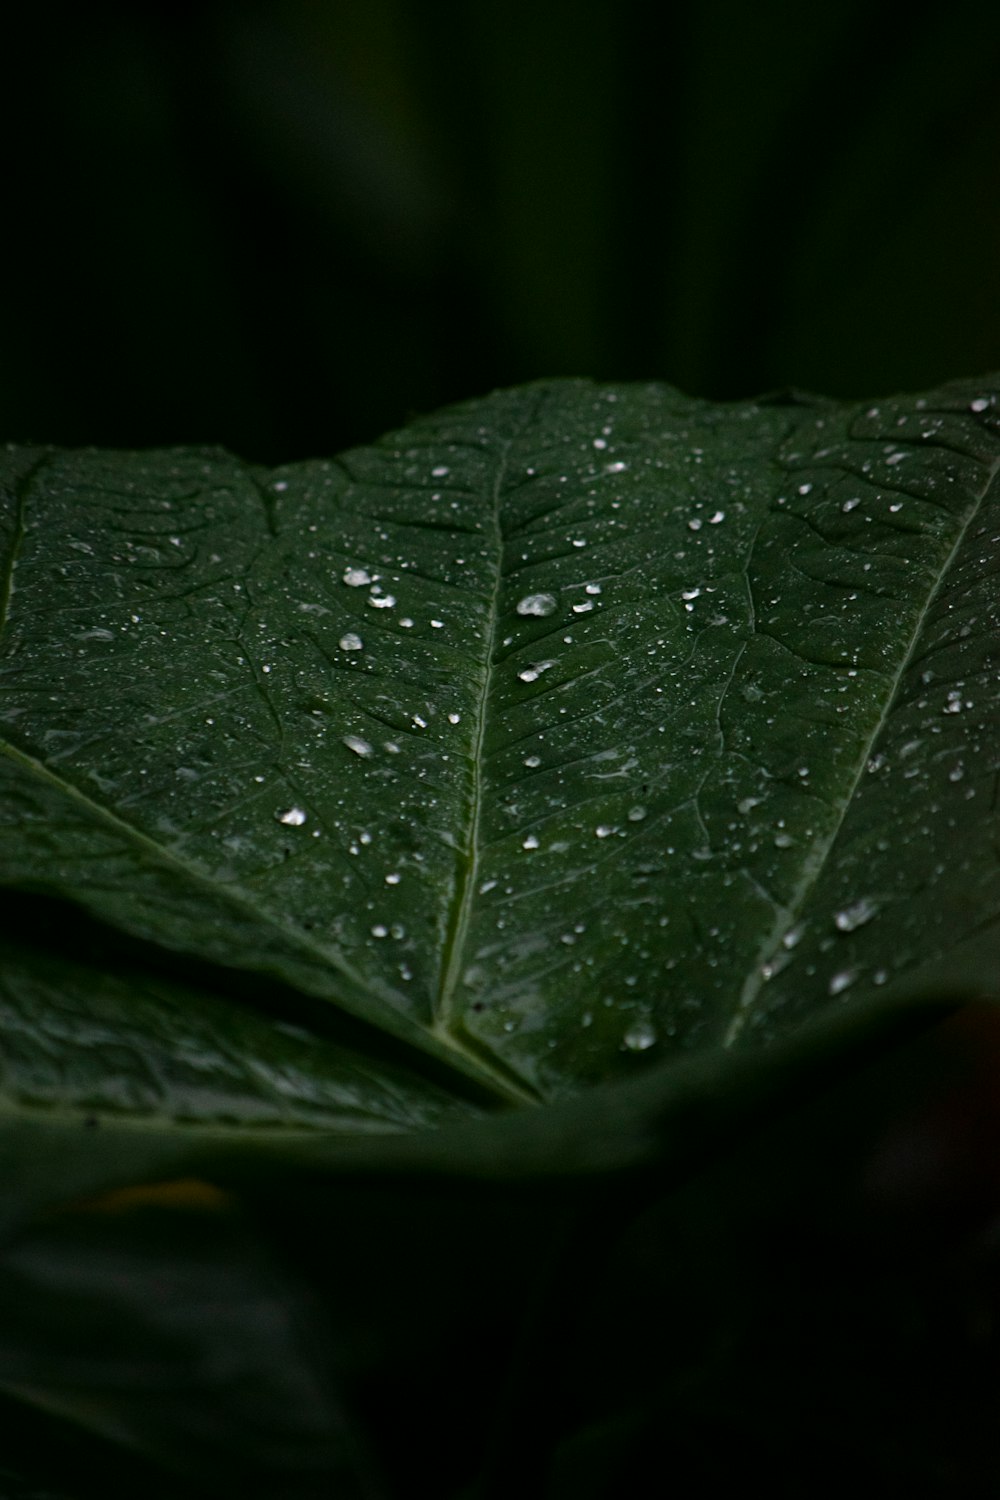 a leaf with water droplets on it